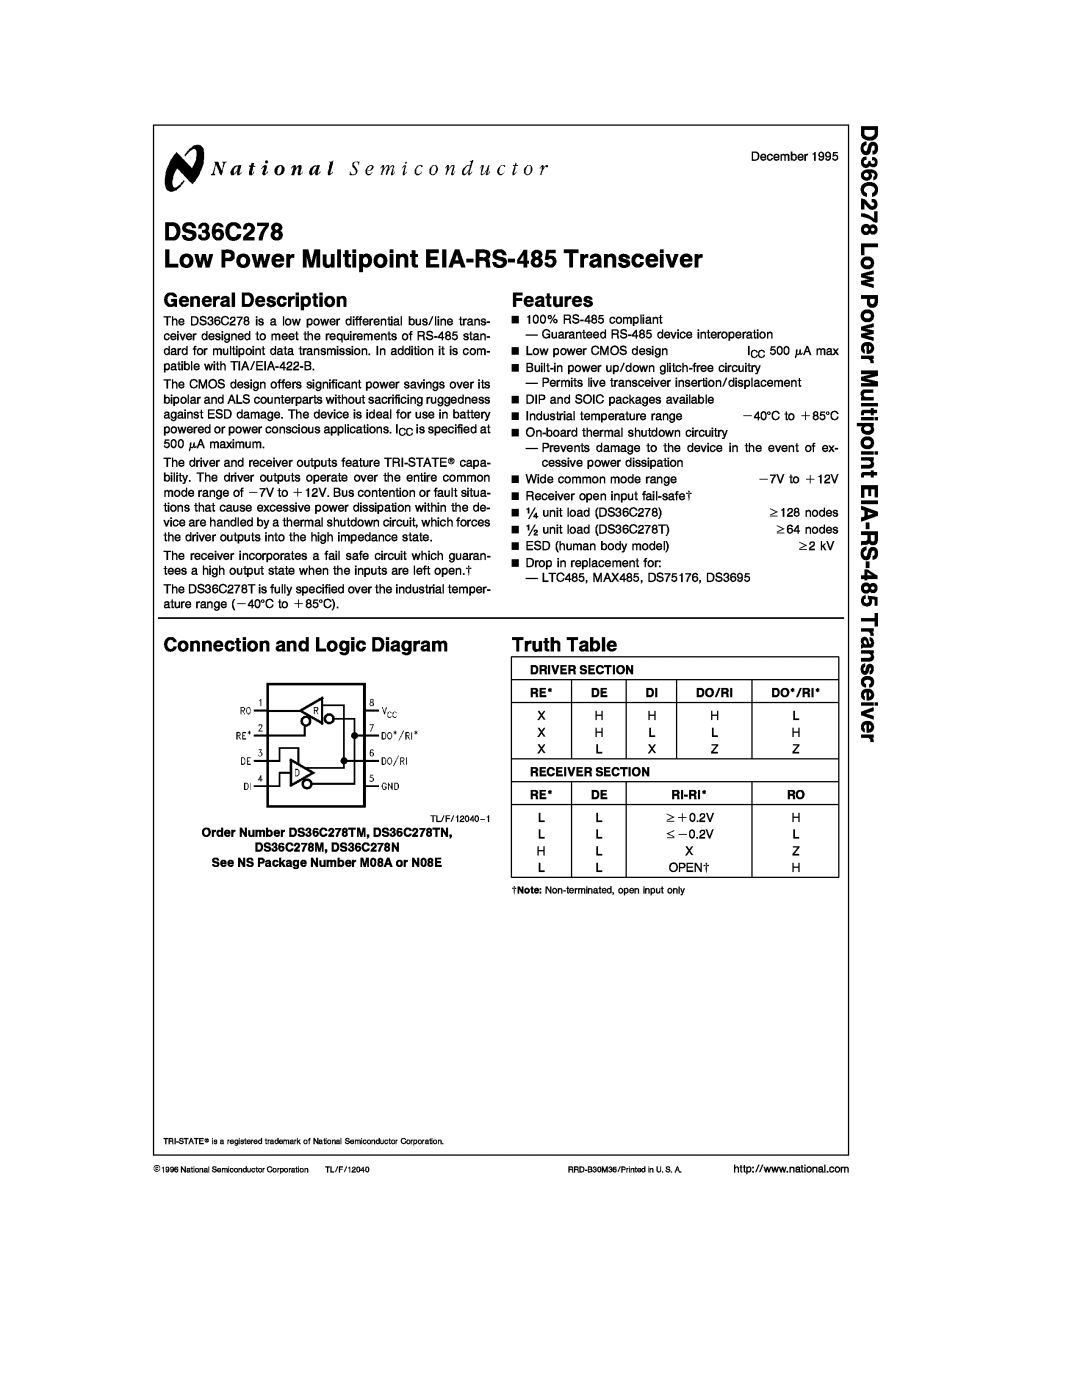 National manual DS36C278 Low, Power Multipoint EIA-RS-485, Transceiver, General Description, Features, Truth Table 